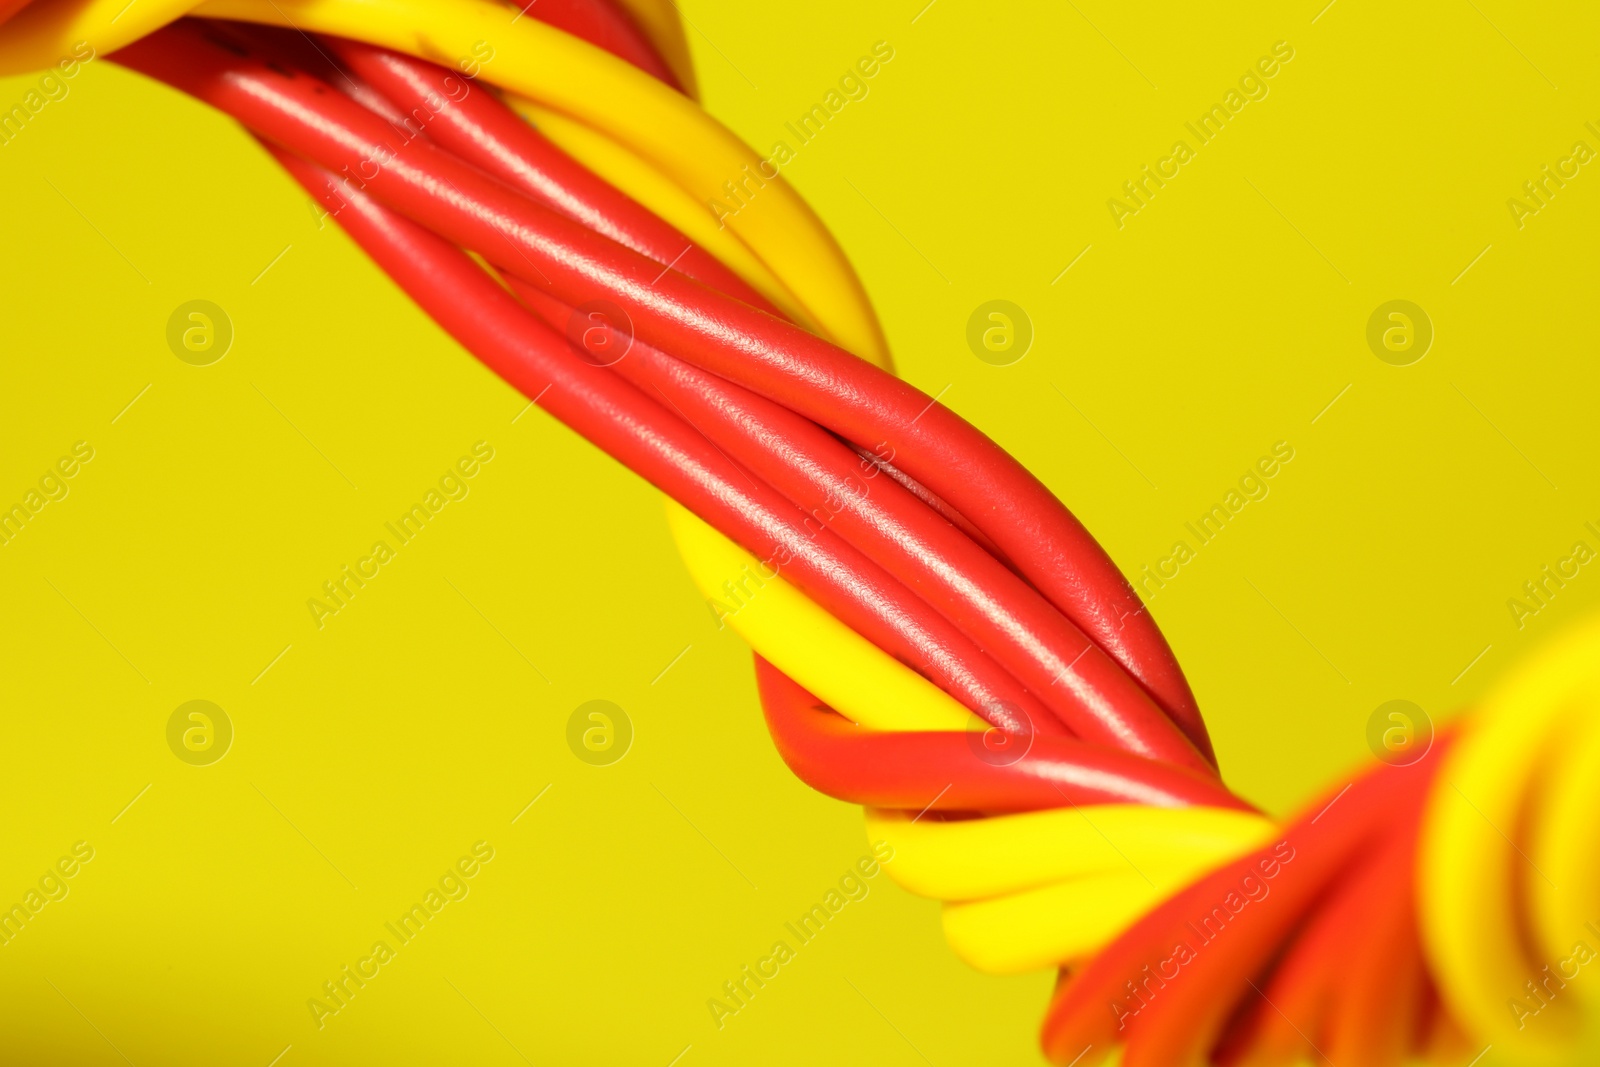 Photo of Electrical wires on yellow background, closeup view